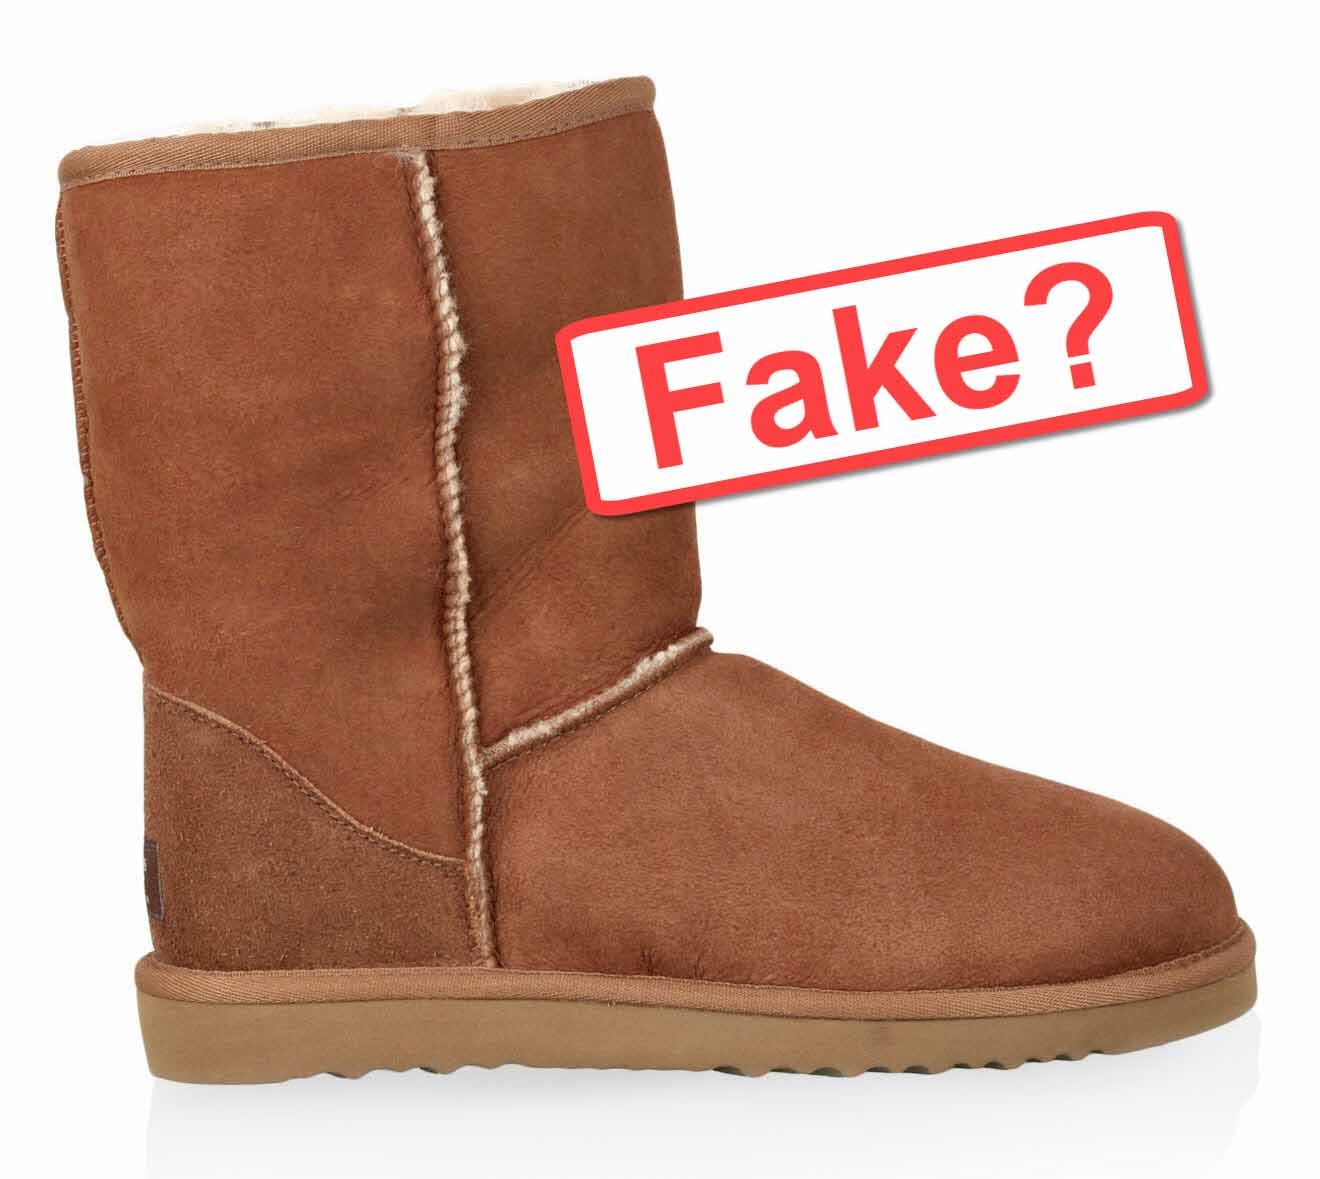 authentic ugg boots sydney